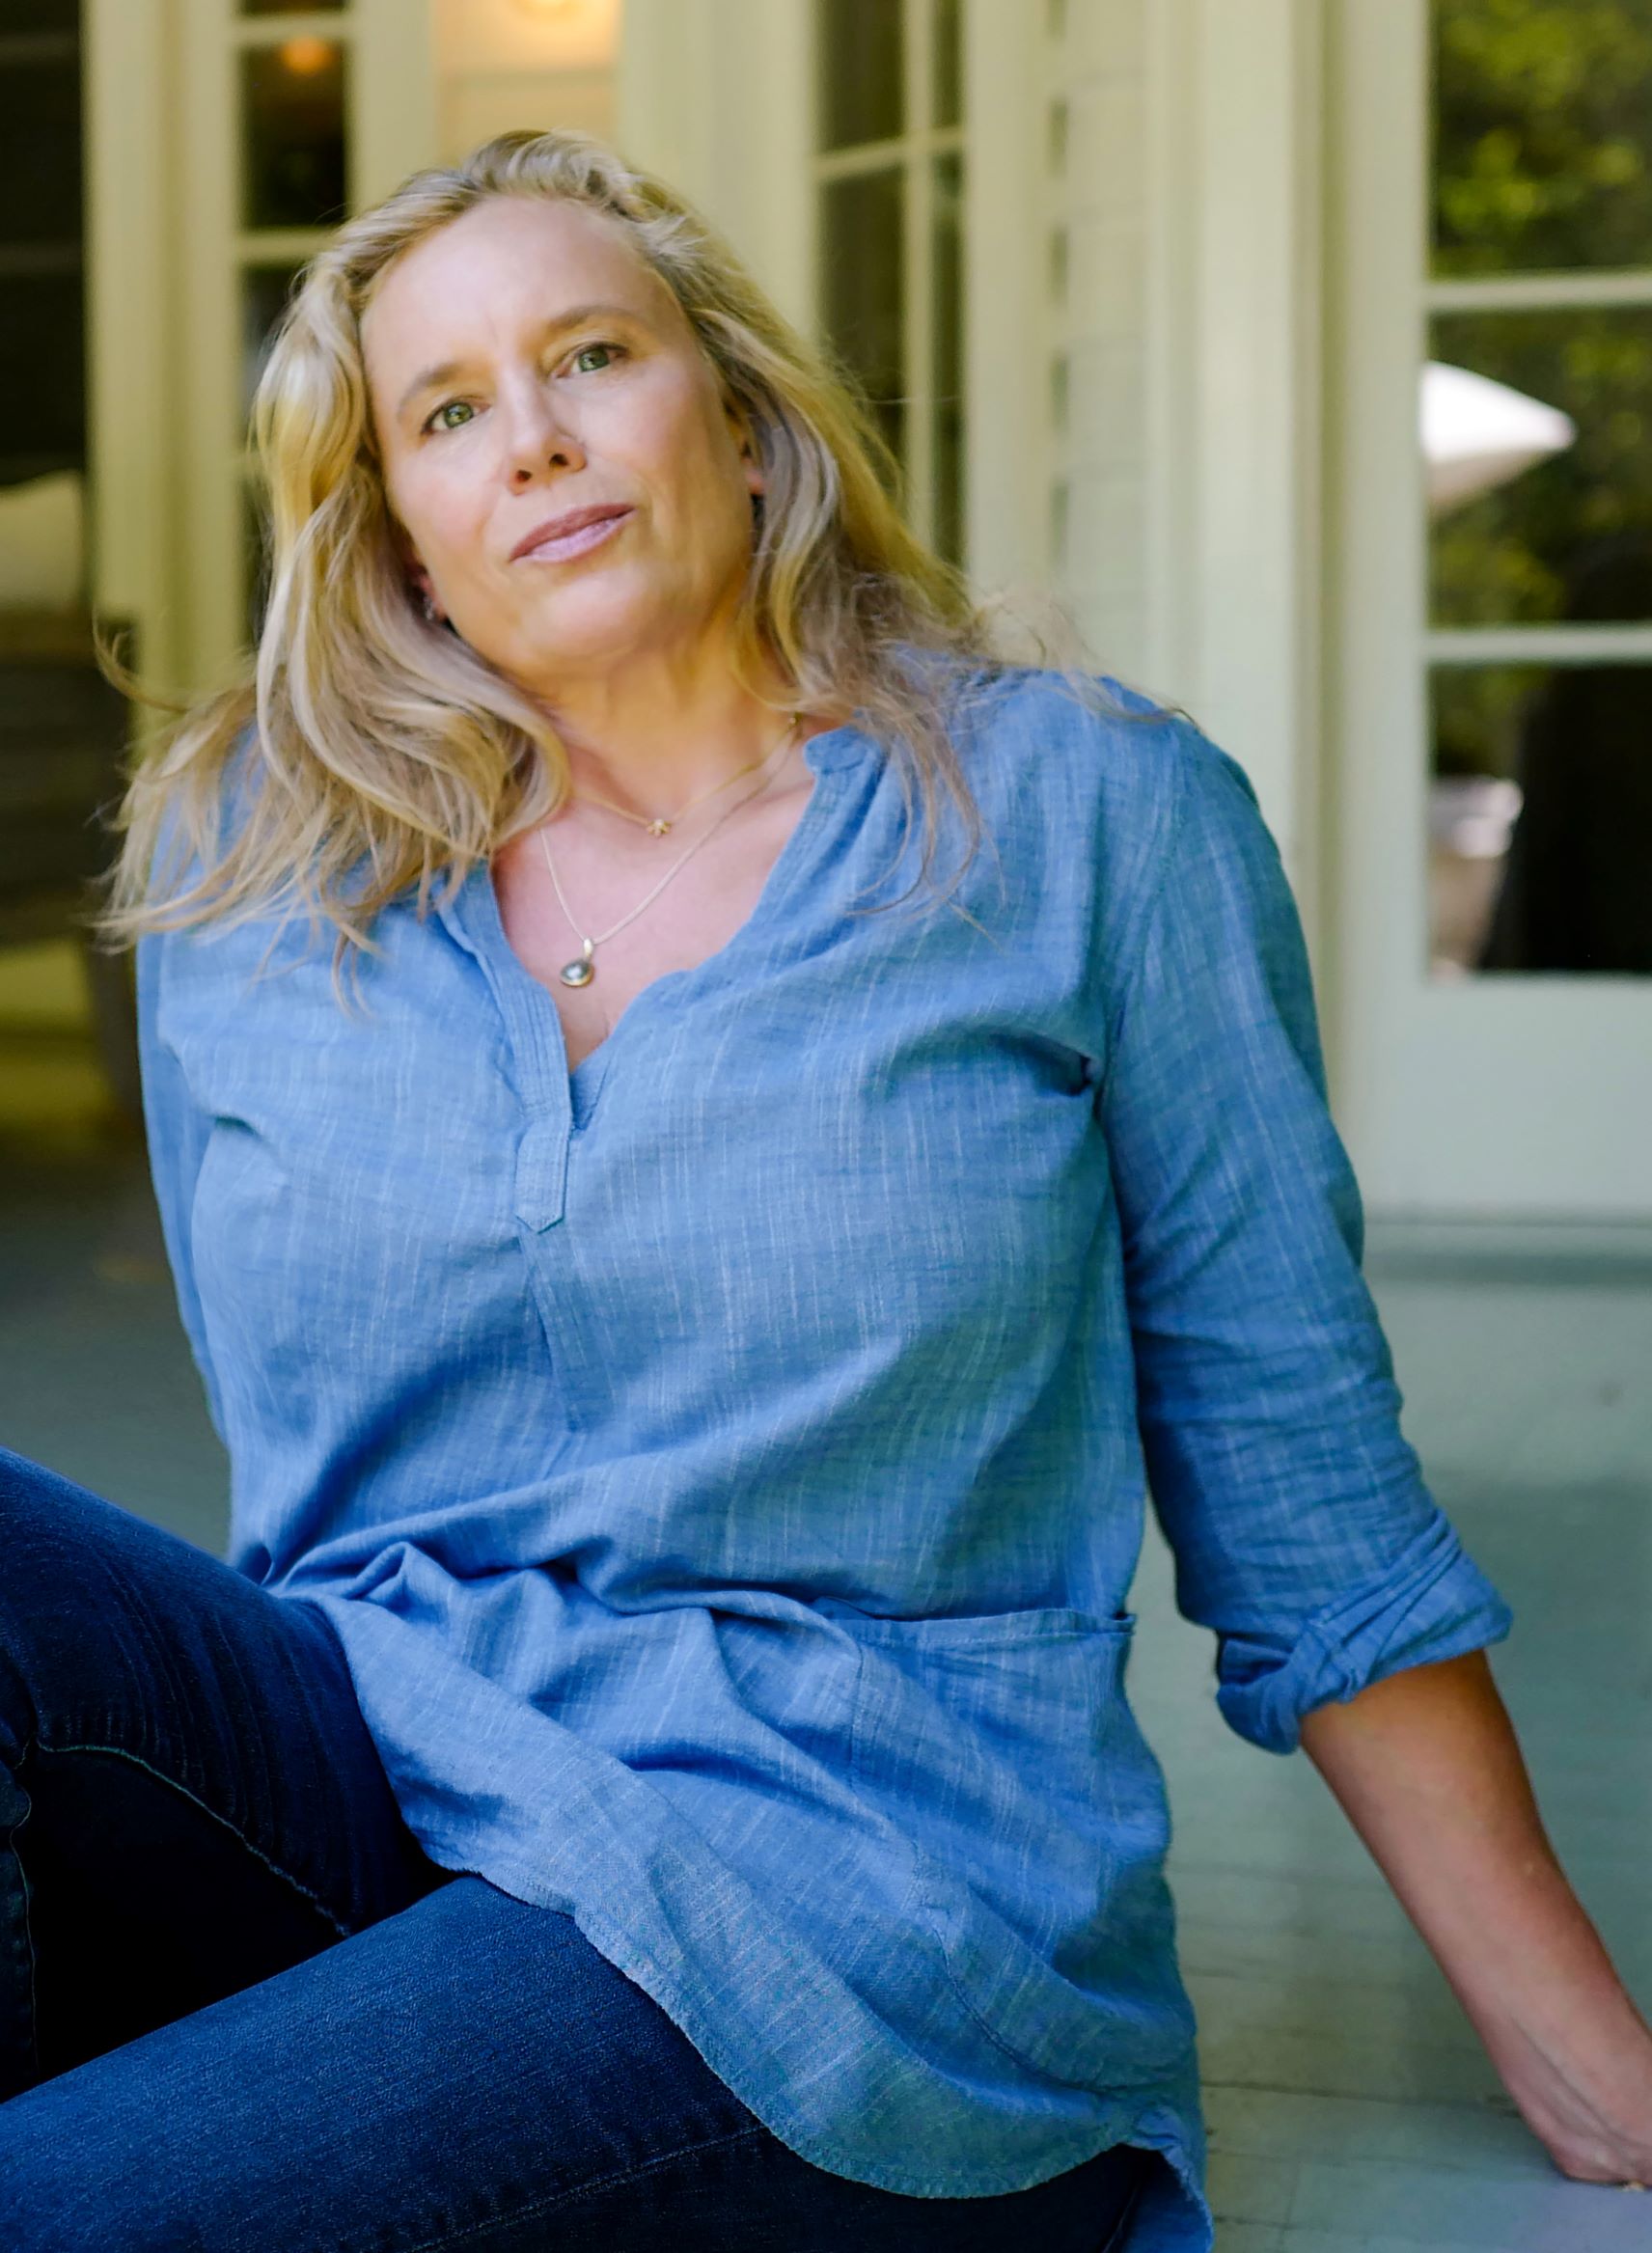 Miranda Cowley Heller sitting back on her hands, wearing a light blue denim shirt and looking at the camera.